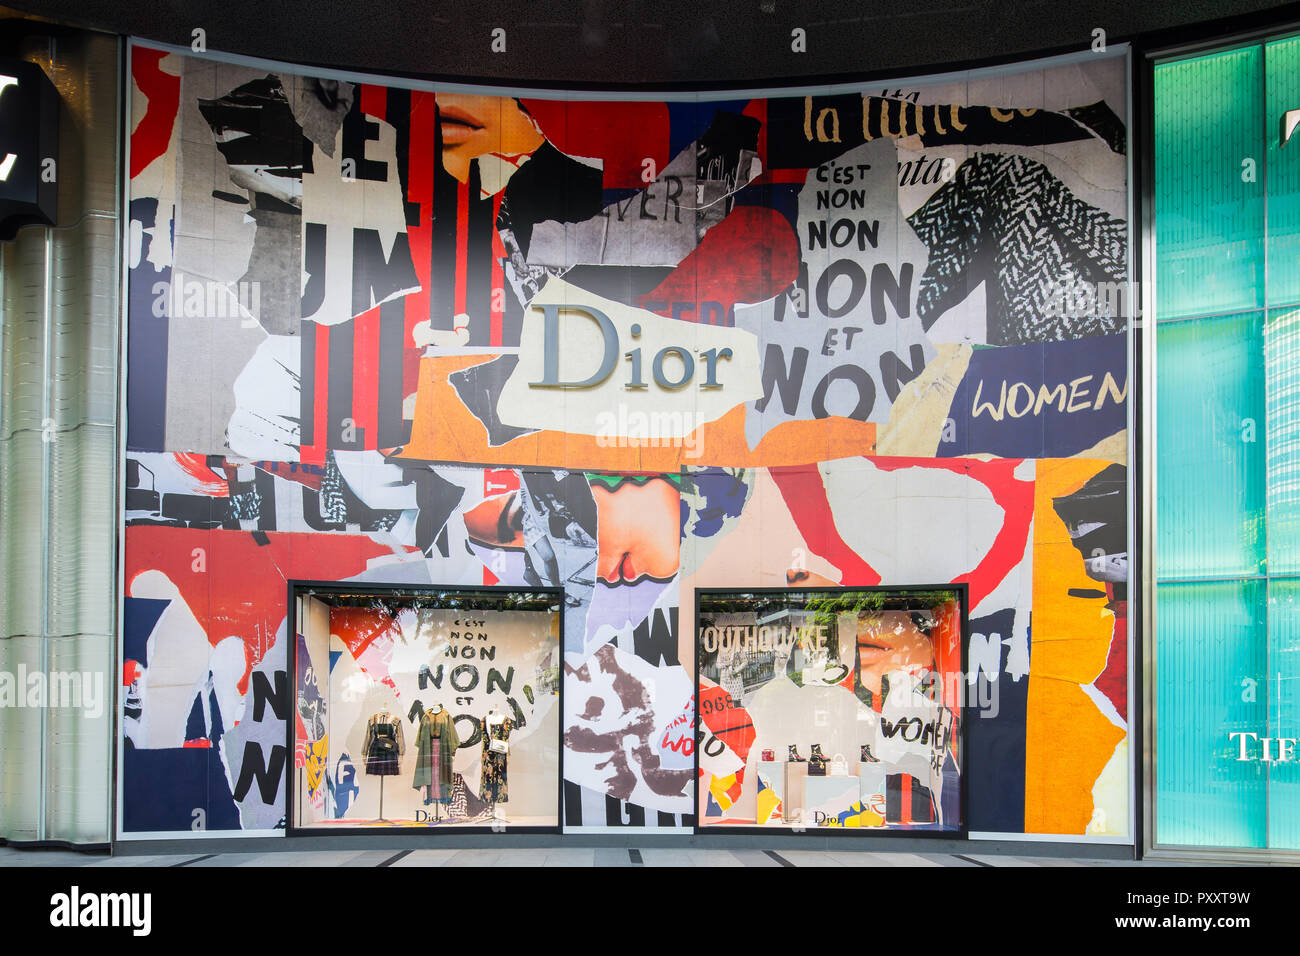 Dior shop frontage at Orchard ION, Singapore Stock Photo